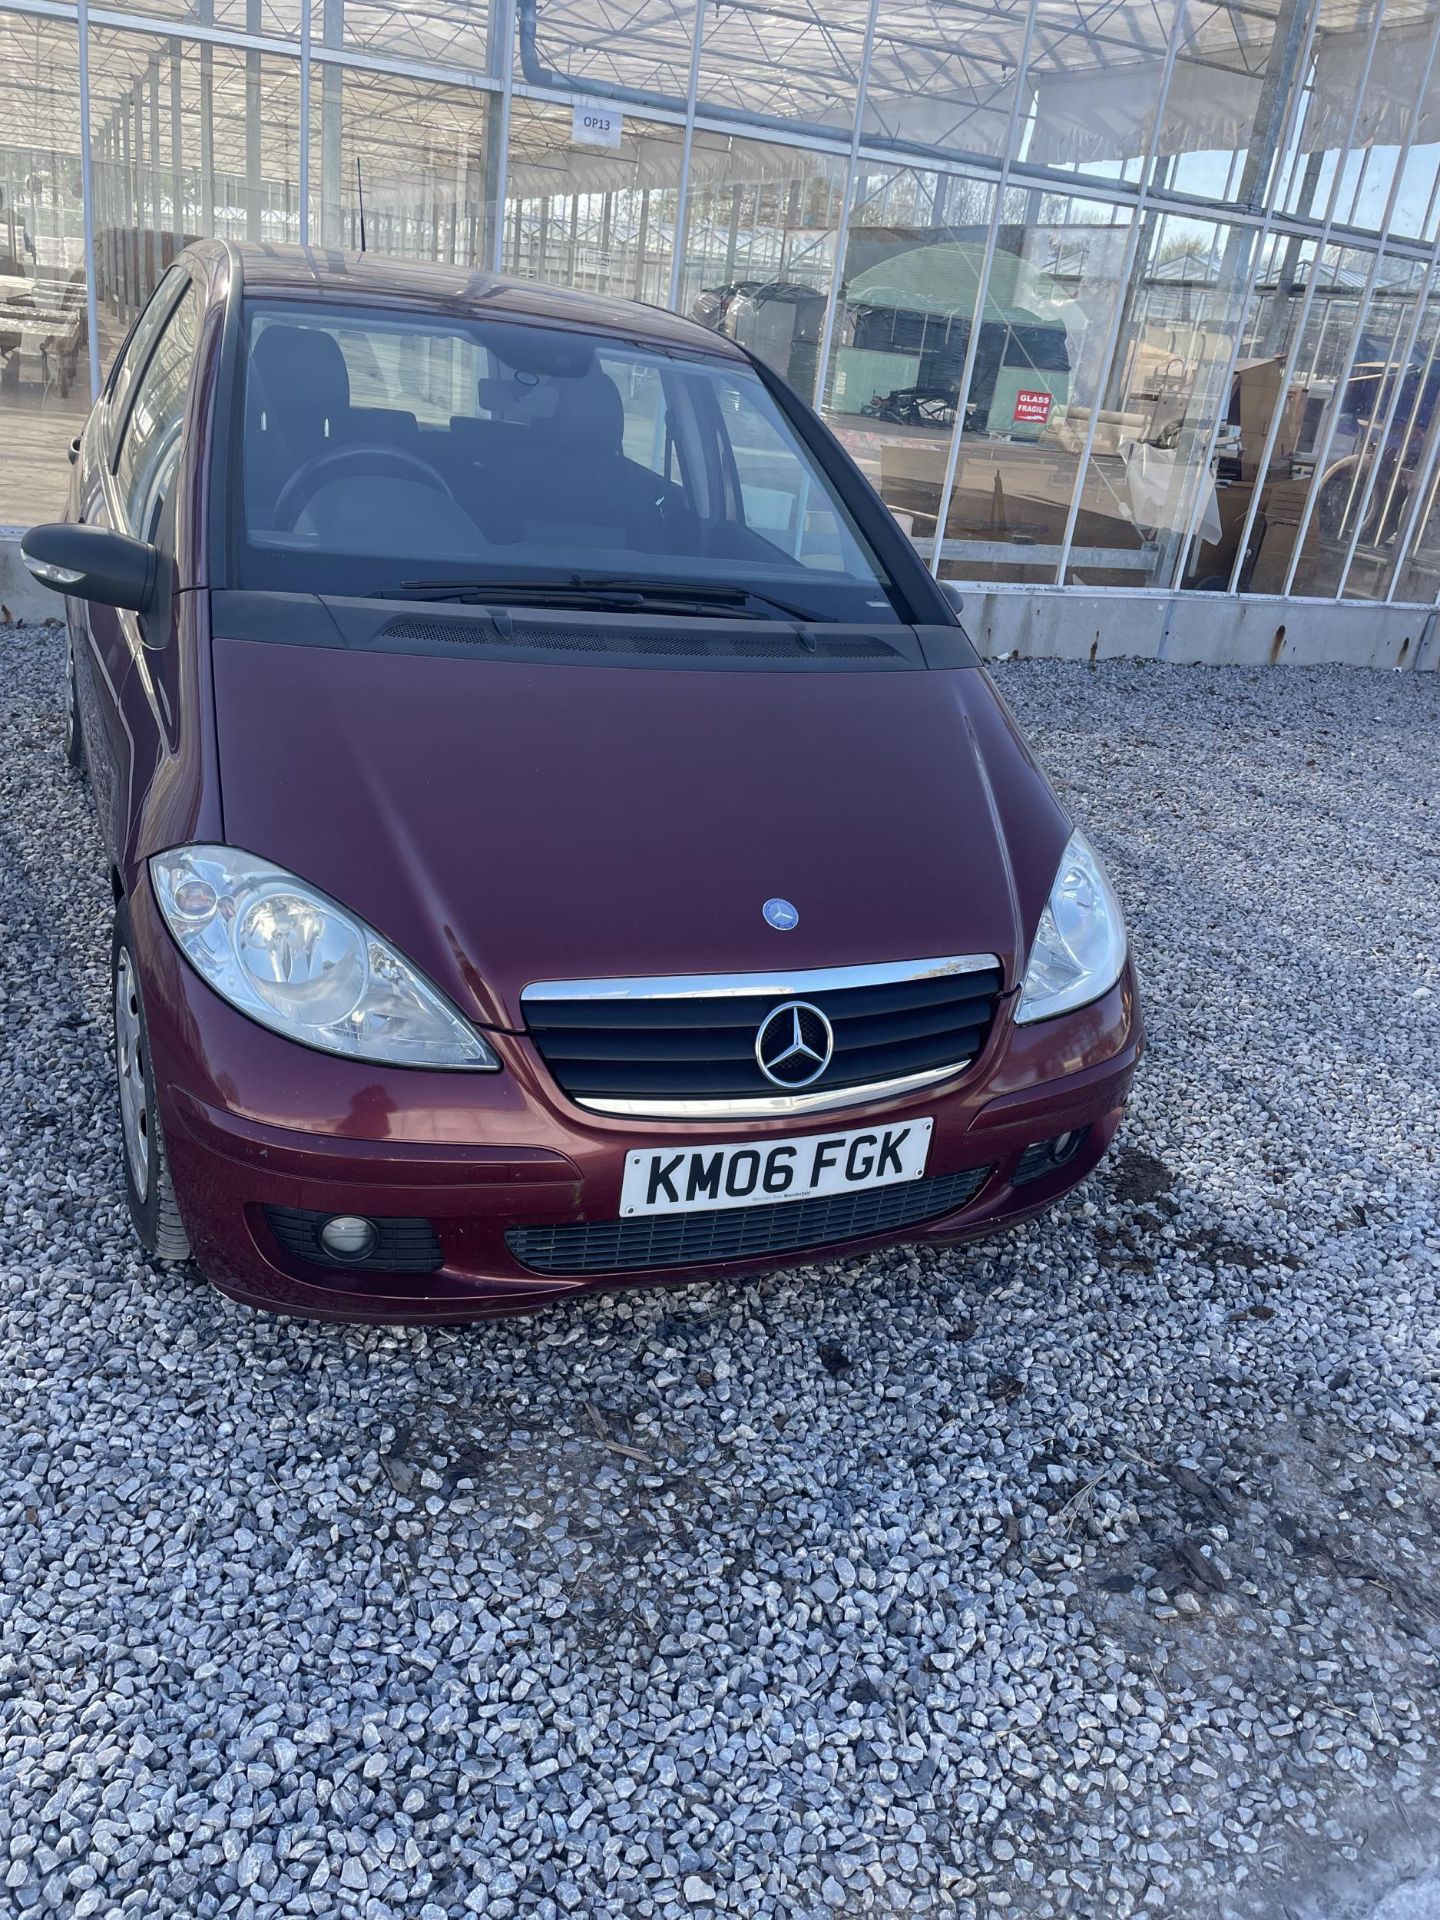 A 2006 MERCEDES A180 CDI CLASSIC FIVE DOOR DIESEL HATCHBACK CAR, AUTOMATIC TRANSMISSION, 103908 - Image 3 of 19